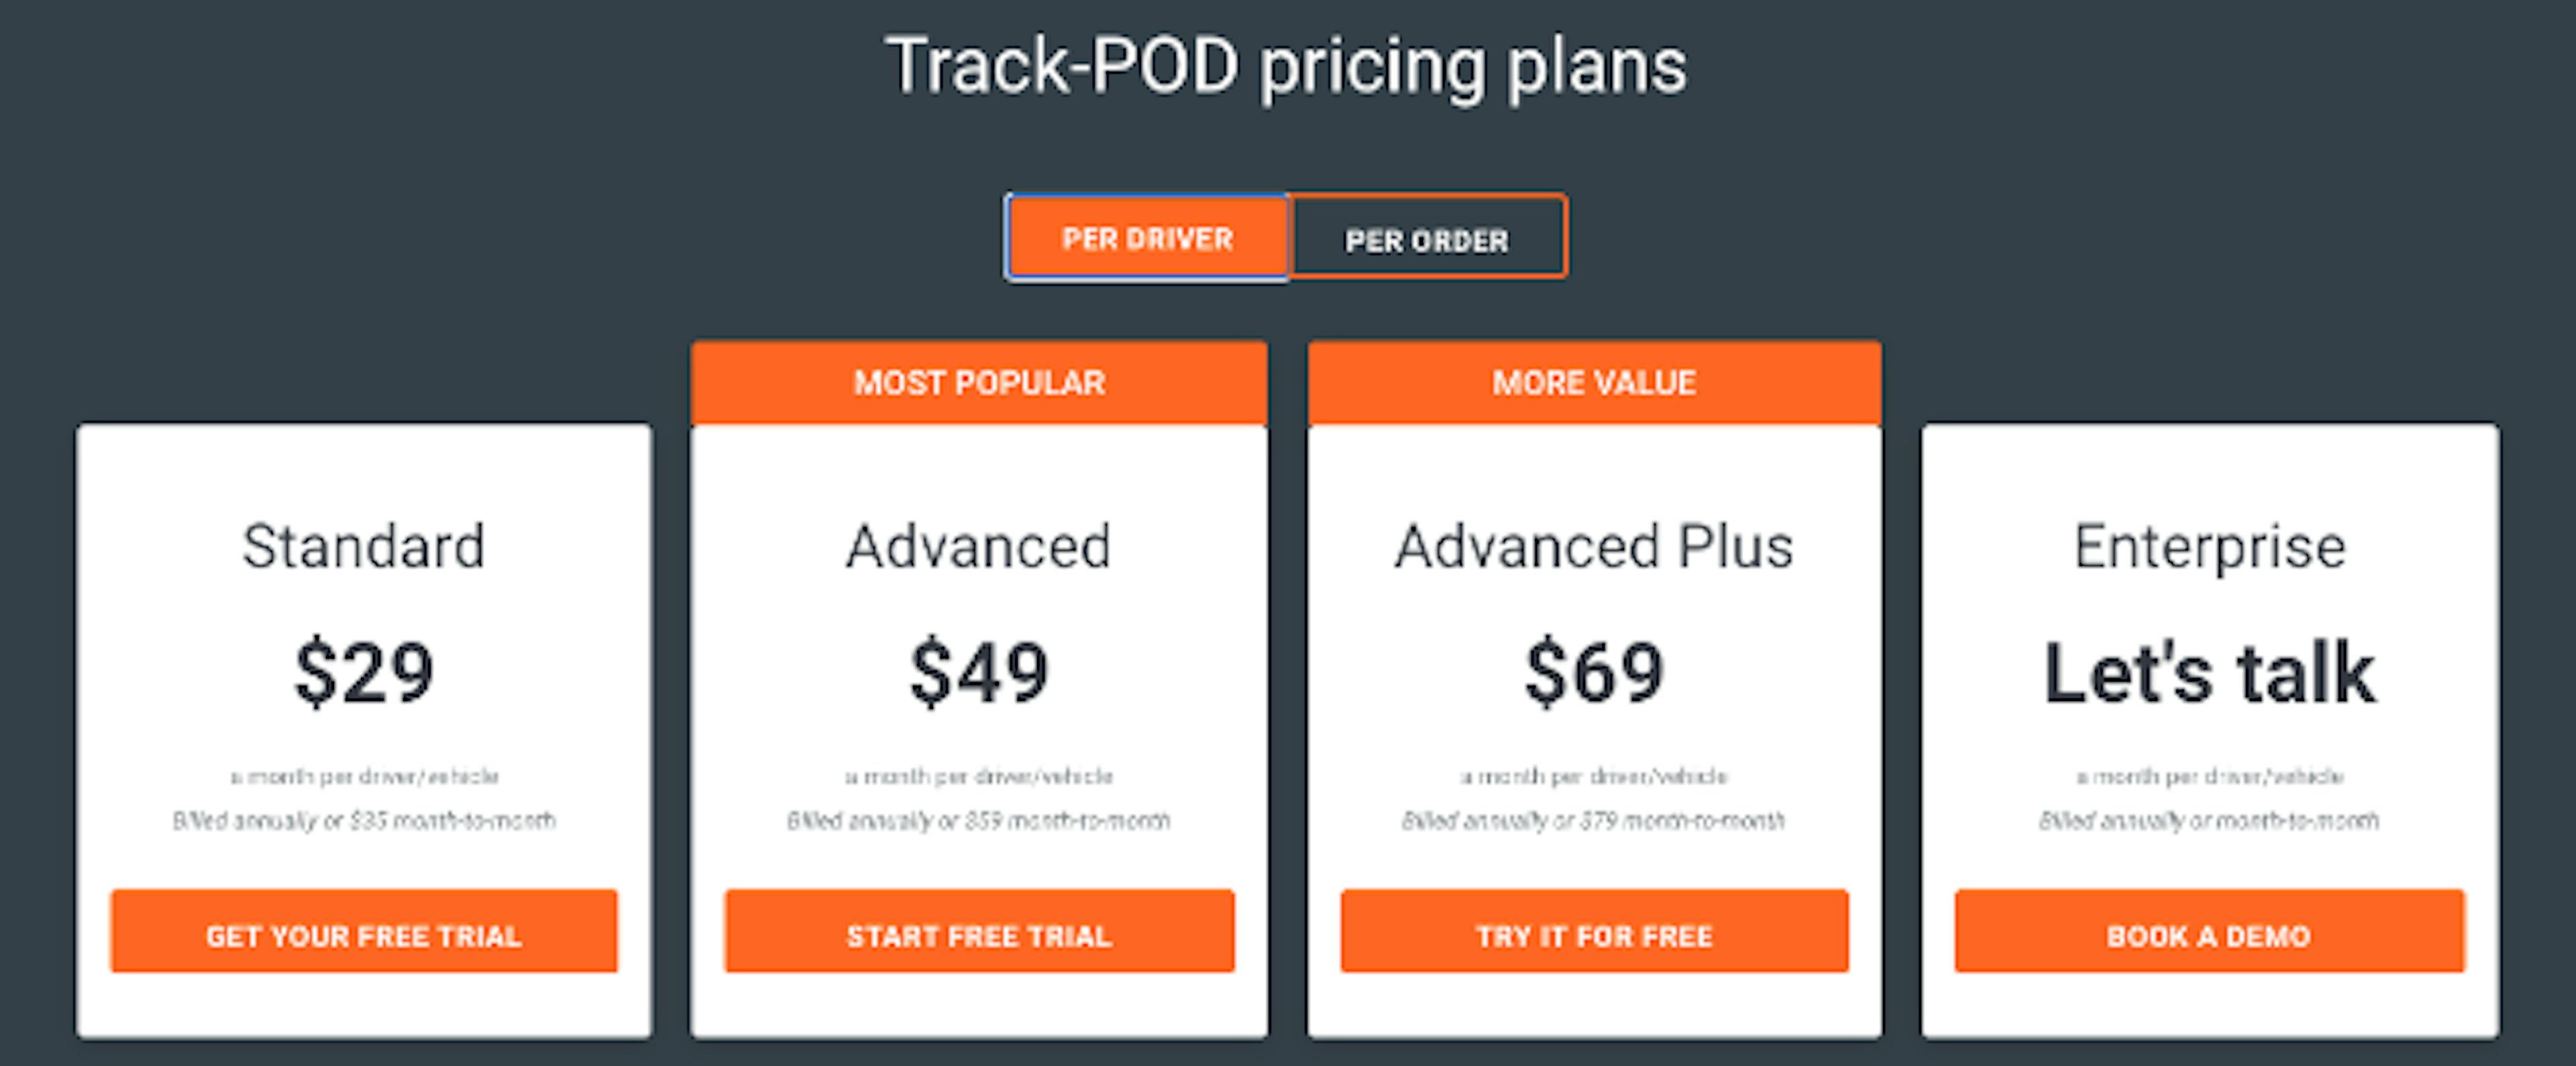 An illustration of Track-POD's four pricing tiers